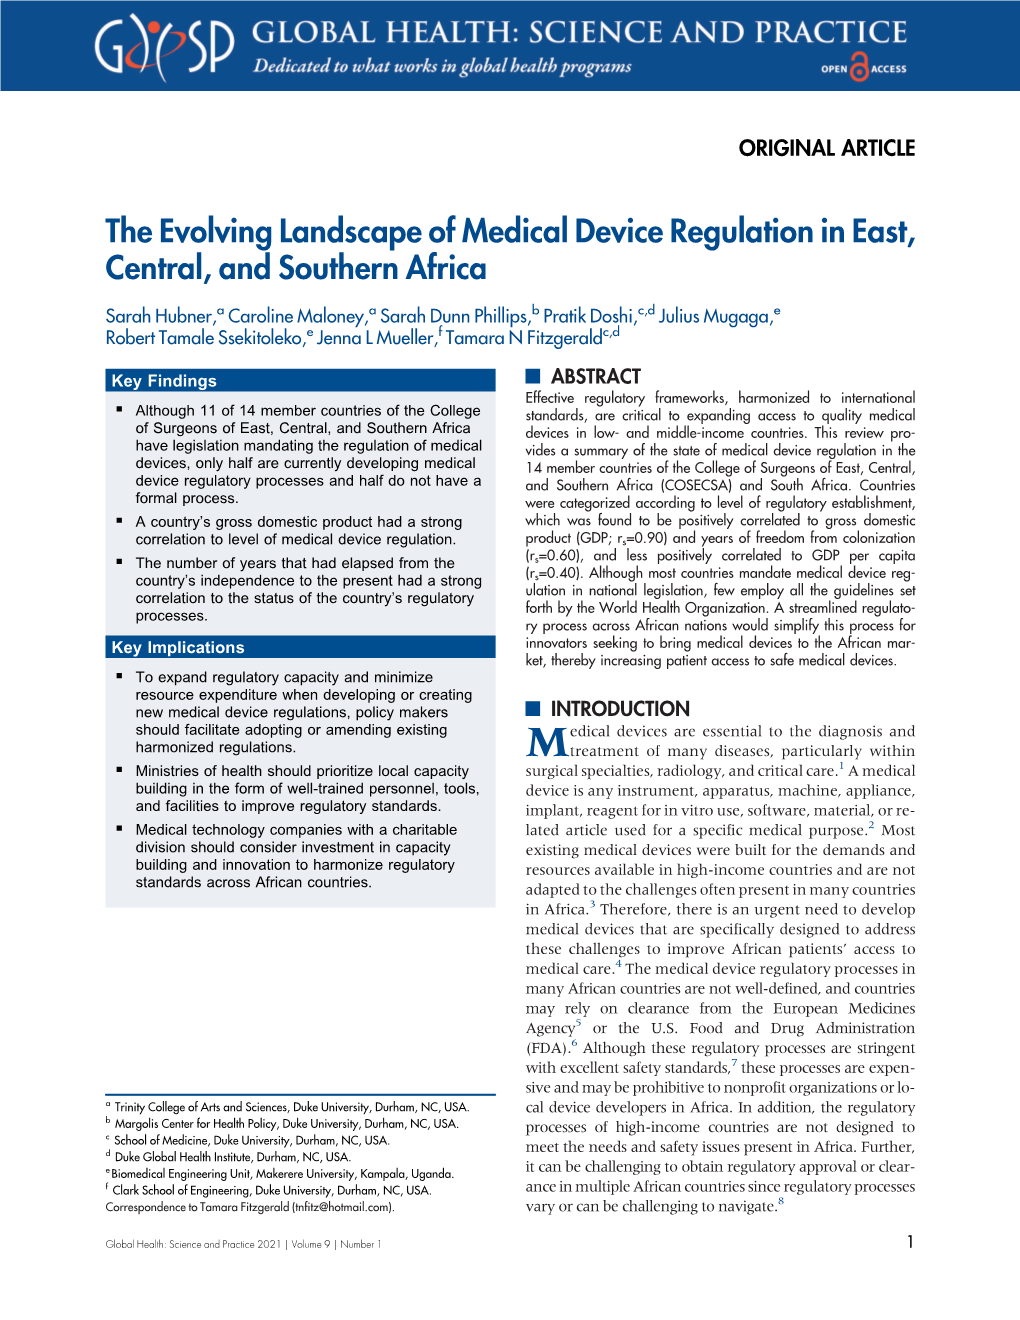 The Evolving Landscape of Medical Device Regulation in East, Central, and Southern Africa